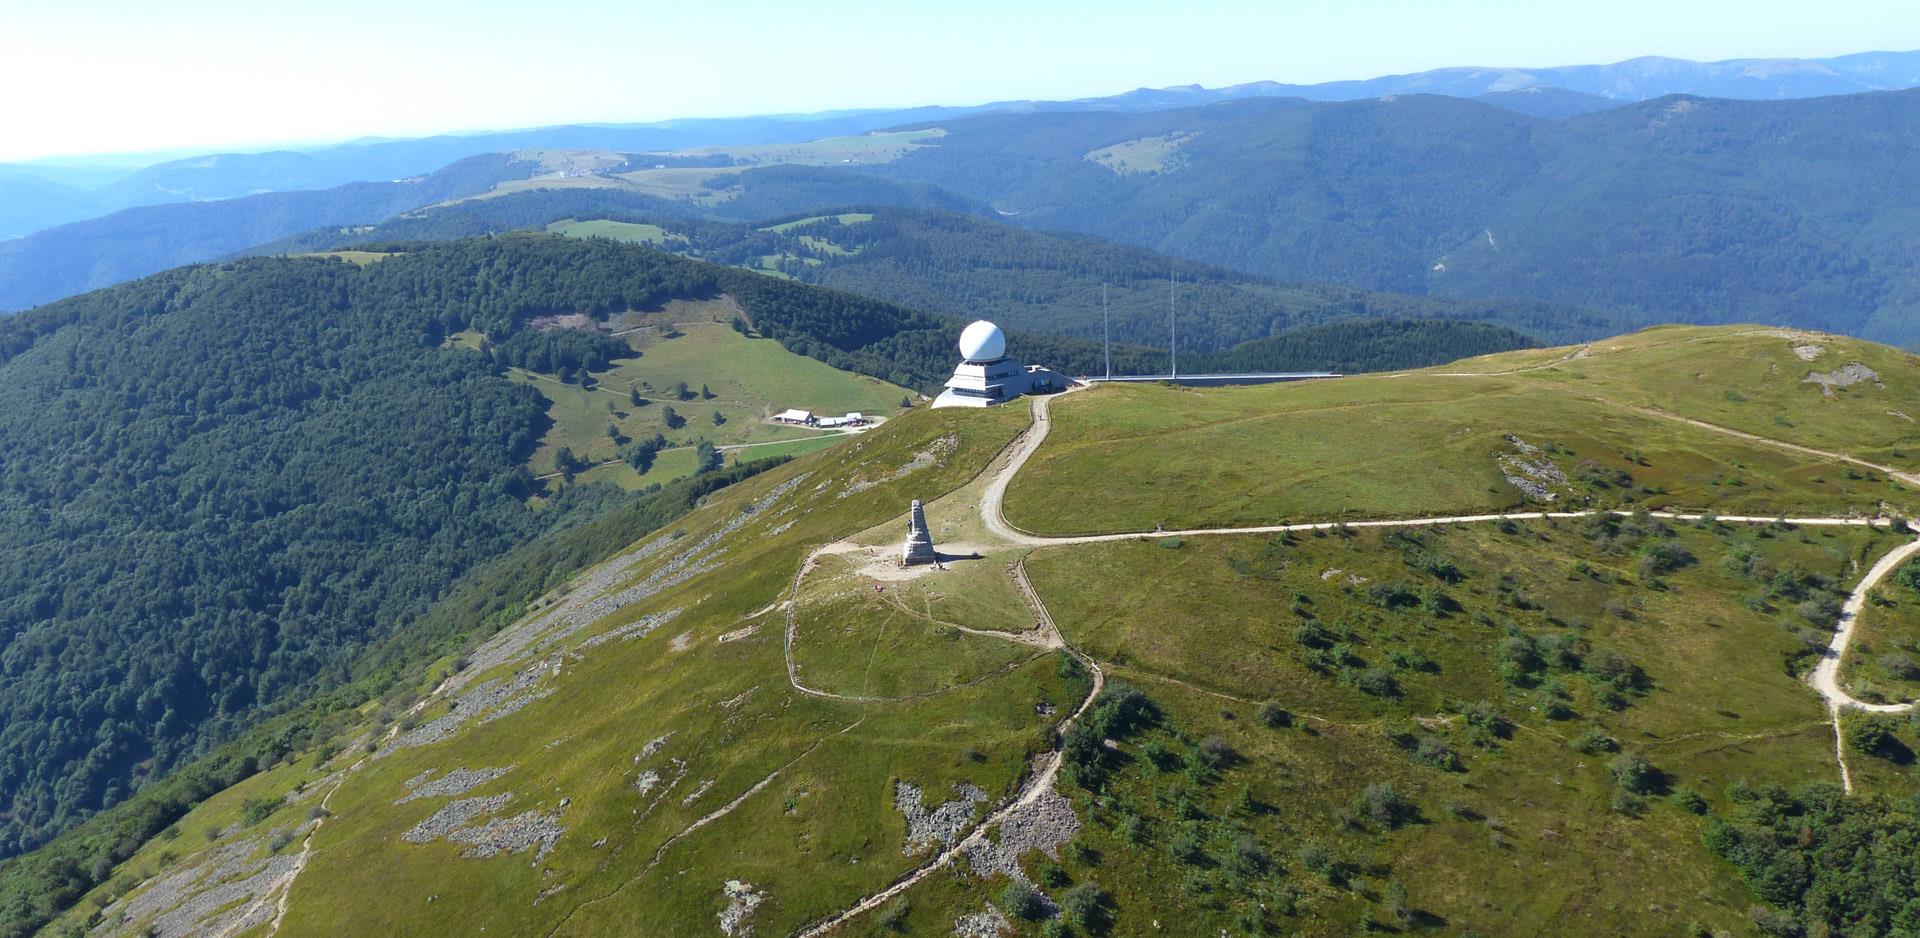 Bird’s eye view of the Grand Ballon d'Alsace, located nearby the campsite Les Castors in Alsace